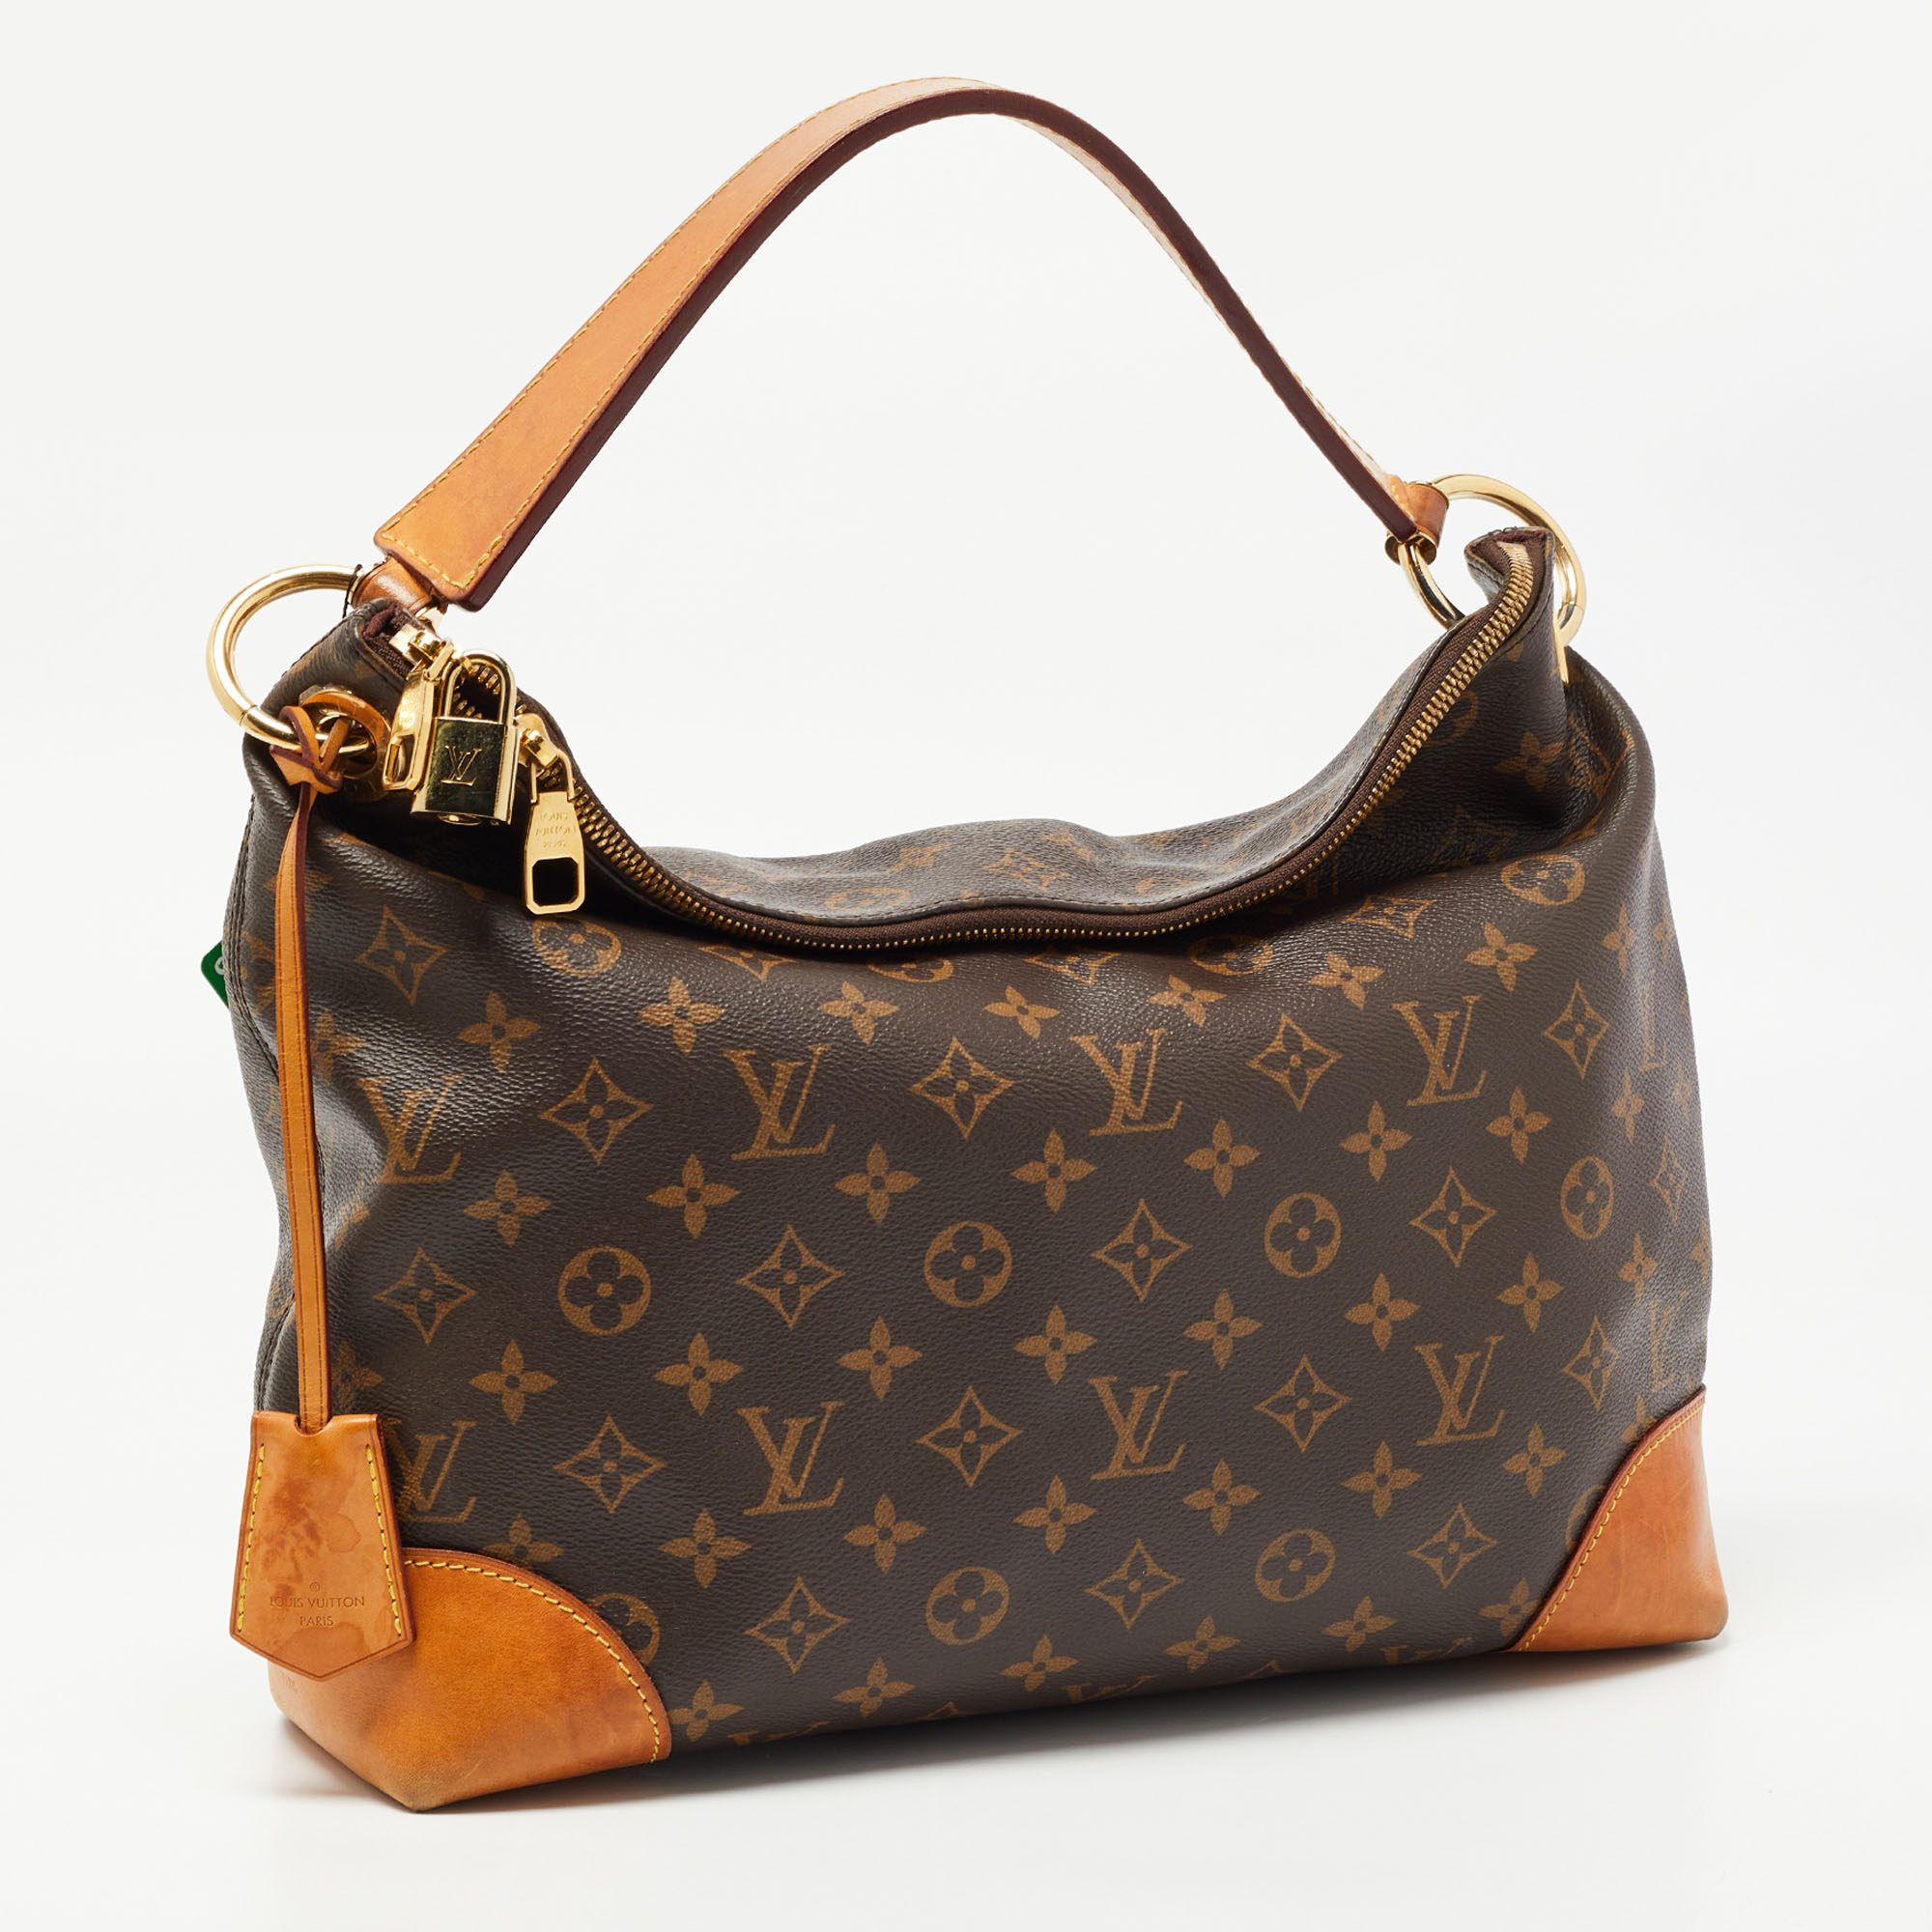 lv berri pm Limited Special Sales and Special Offers - Women's